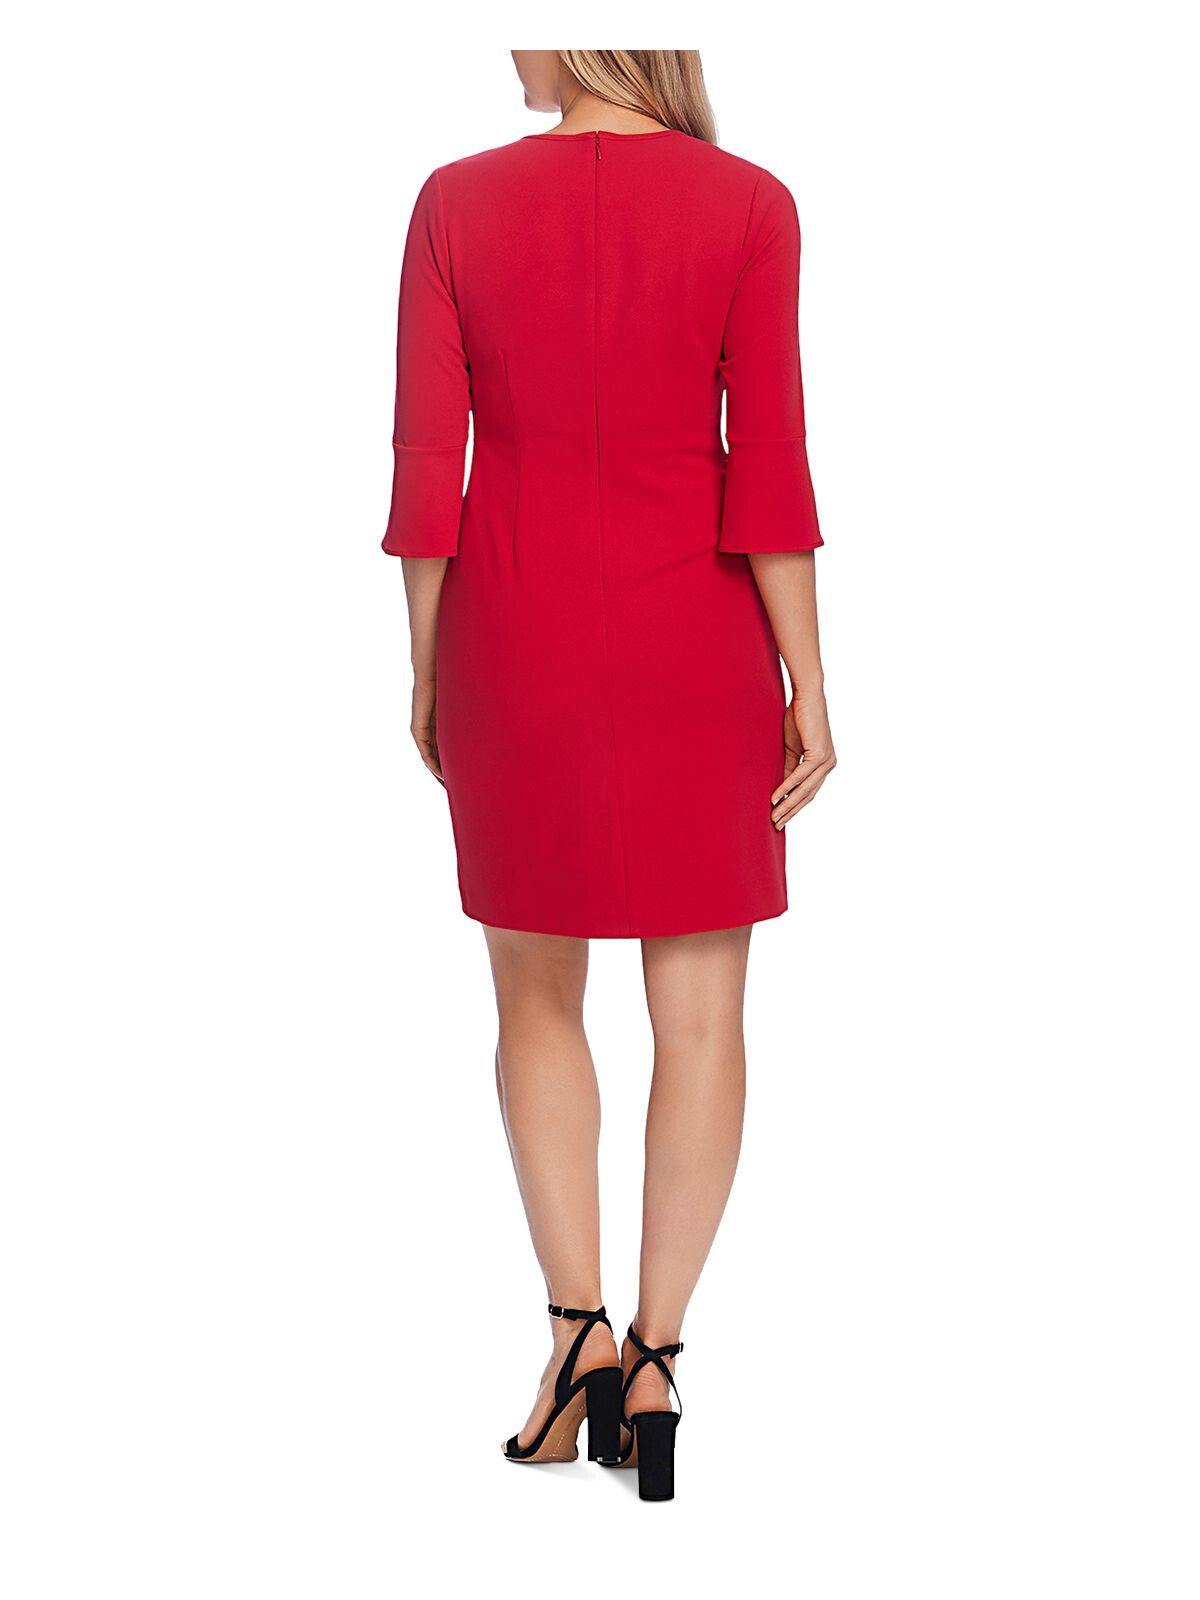 VINCE CAMUTO Womens Red Bell Sleeve Keyhole Short Cocktail Sheath Dress S